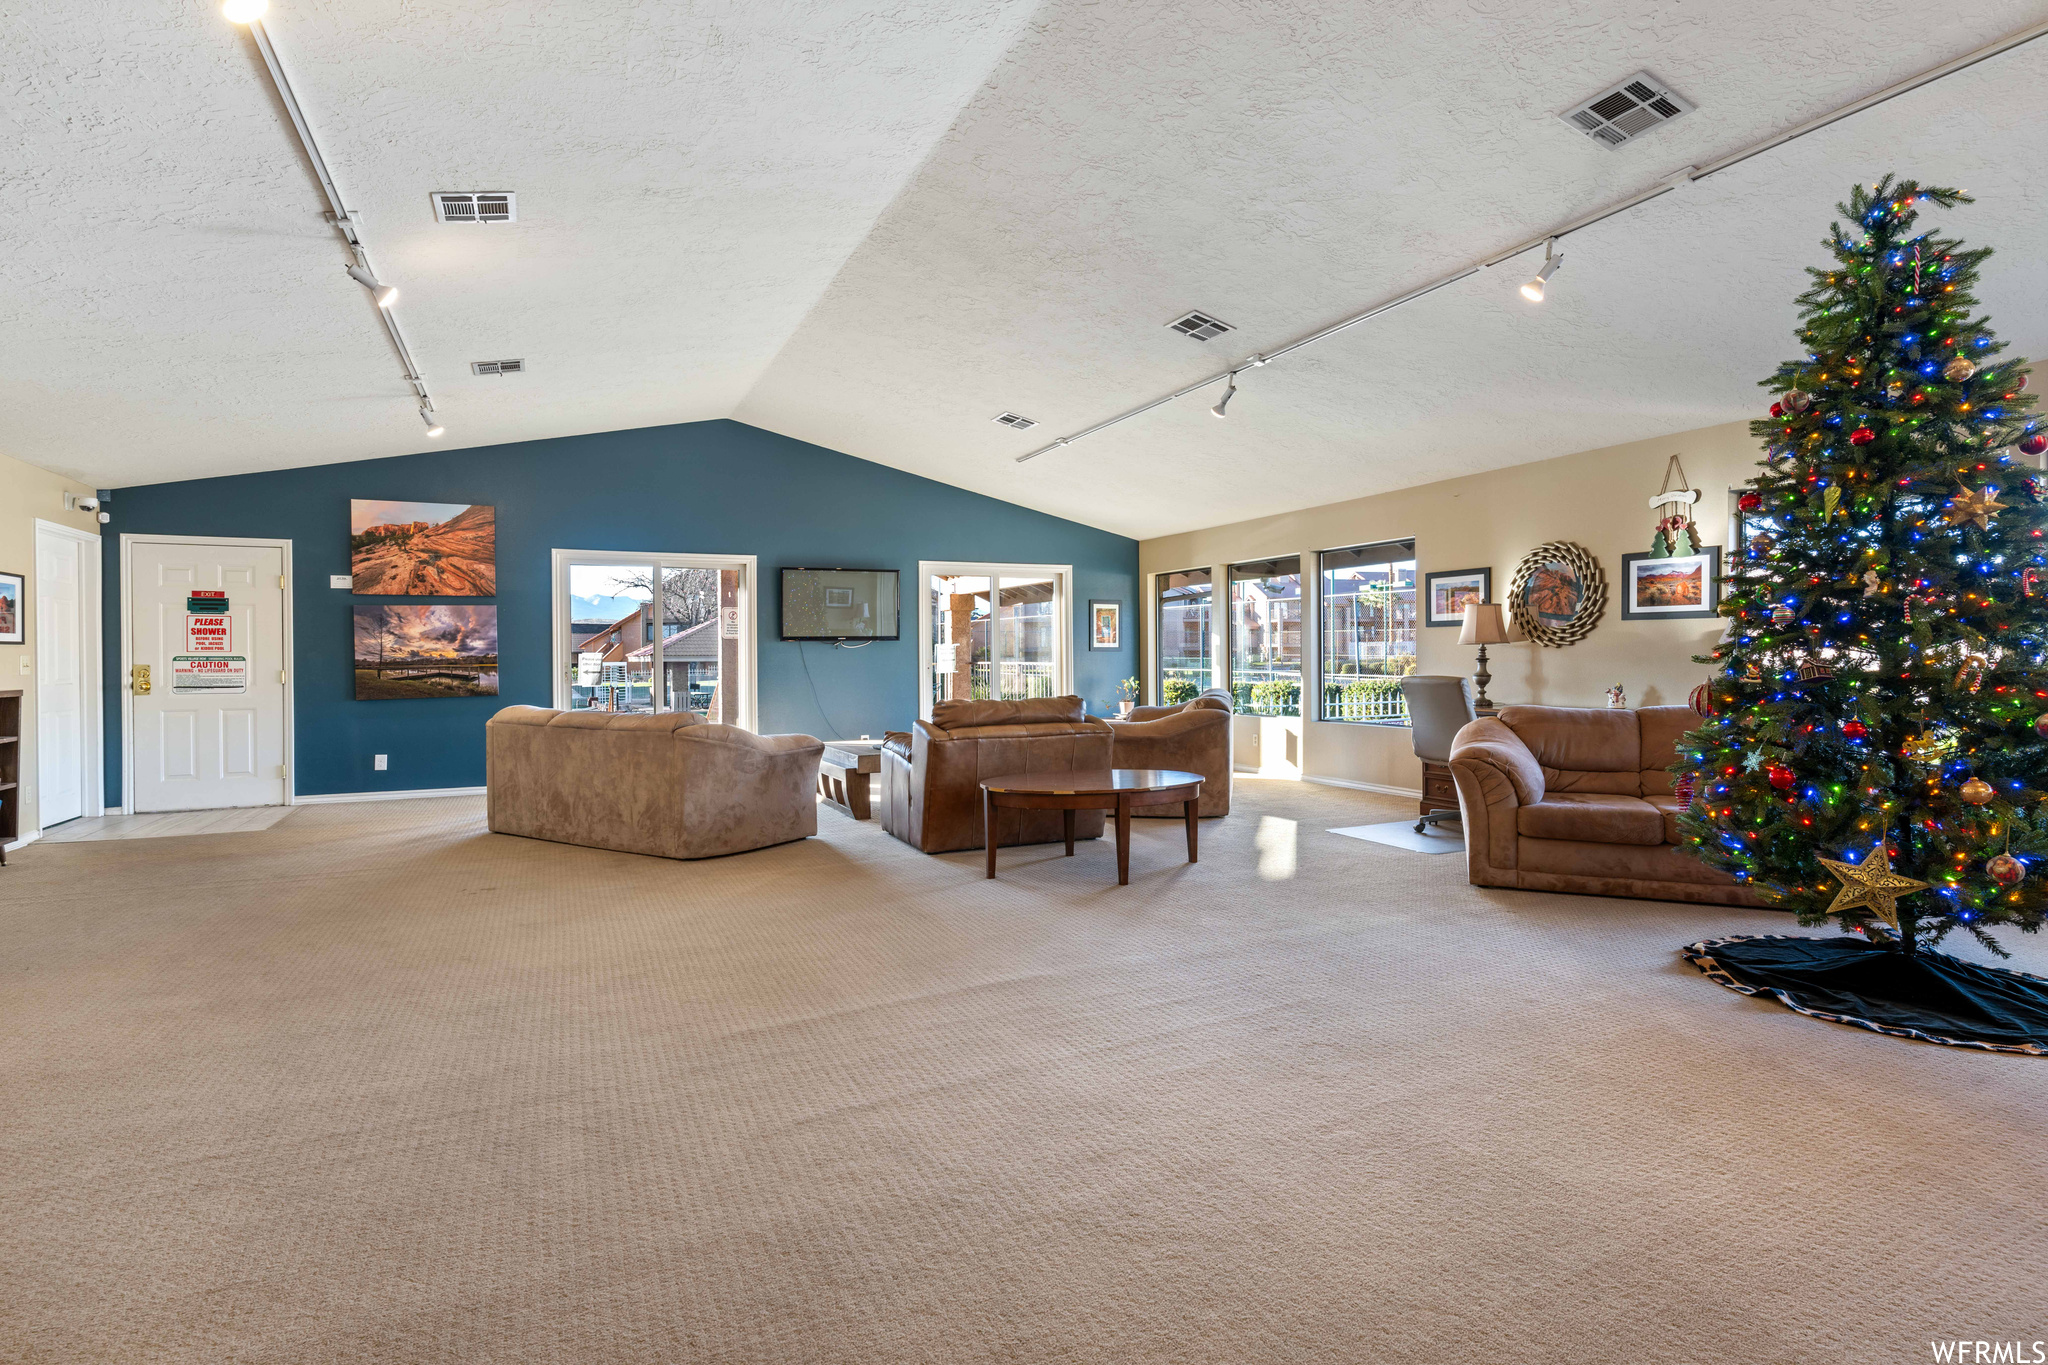 Living room with a textured ceiling, light carpet, rail lighting, and vaulted ceiling